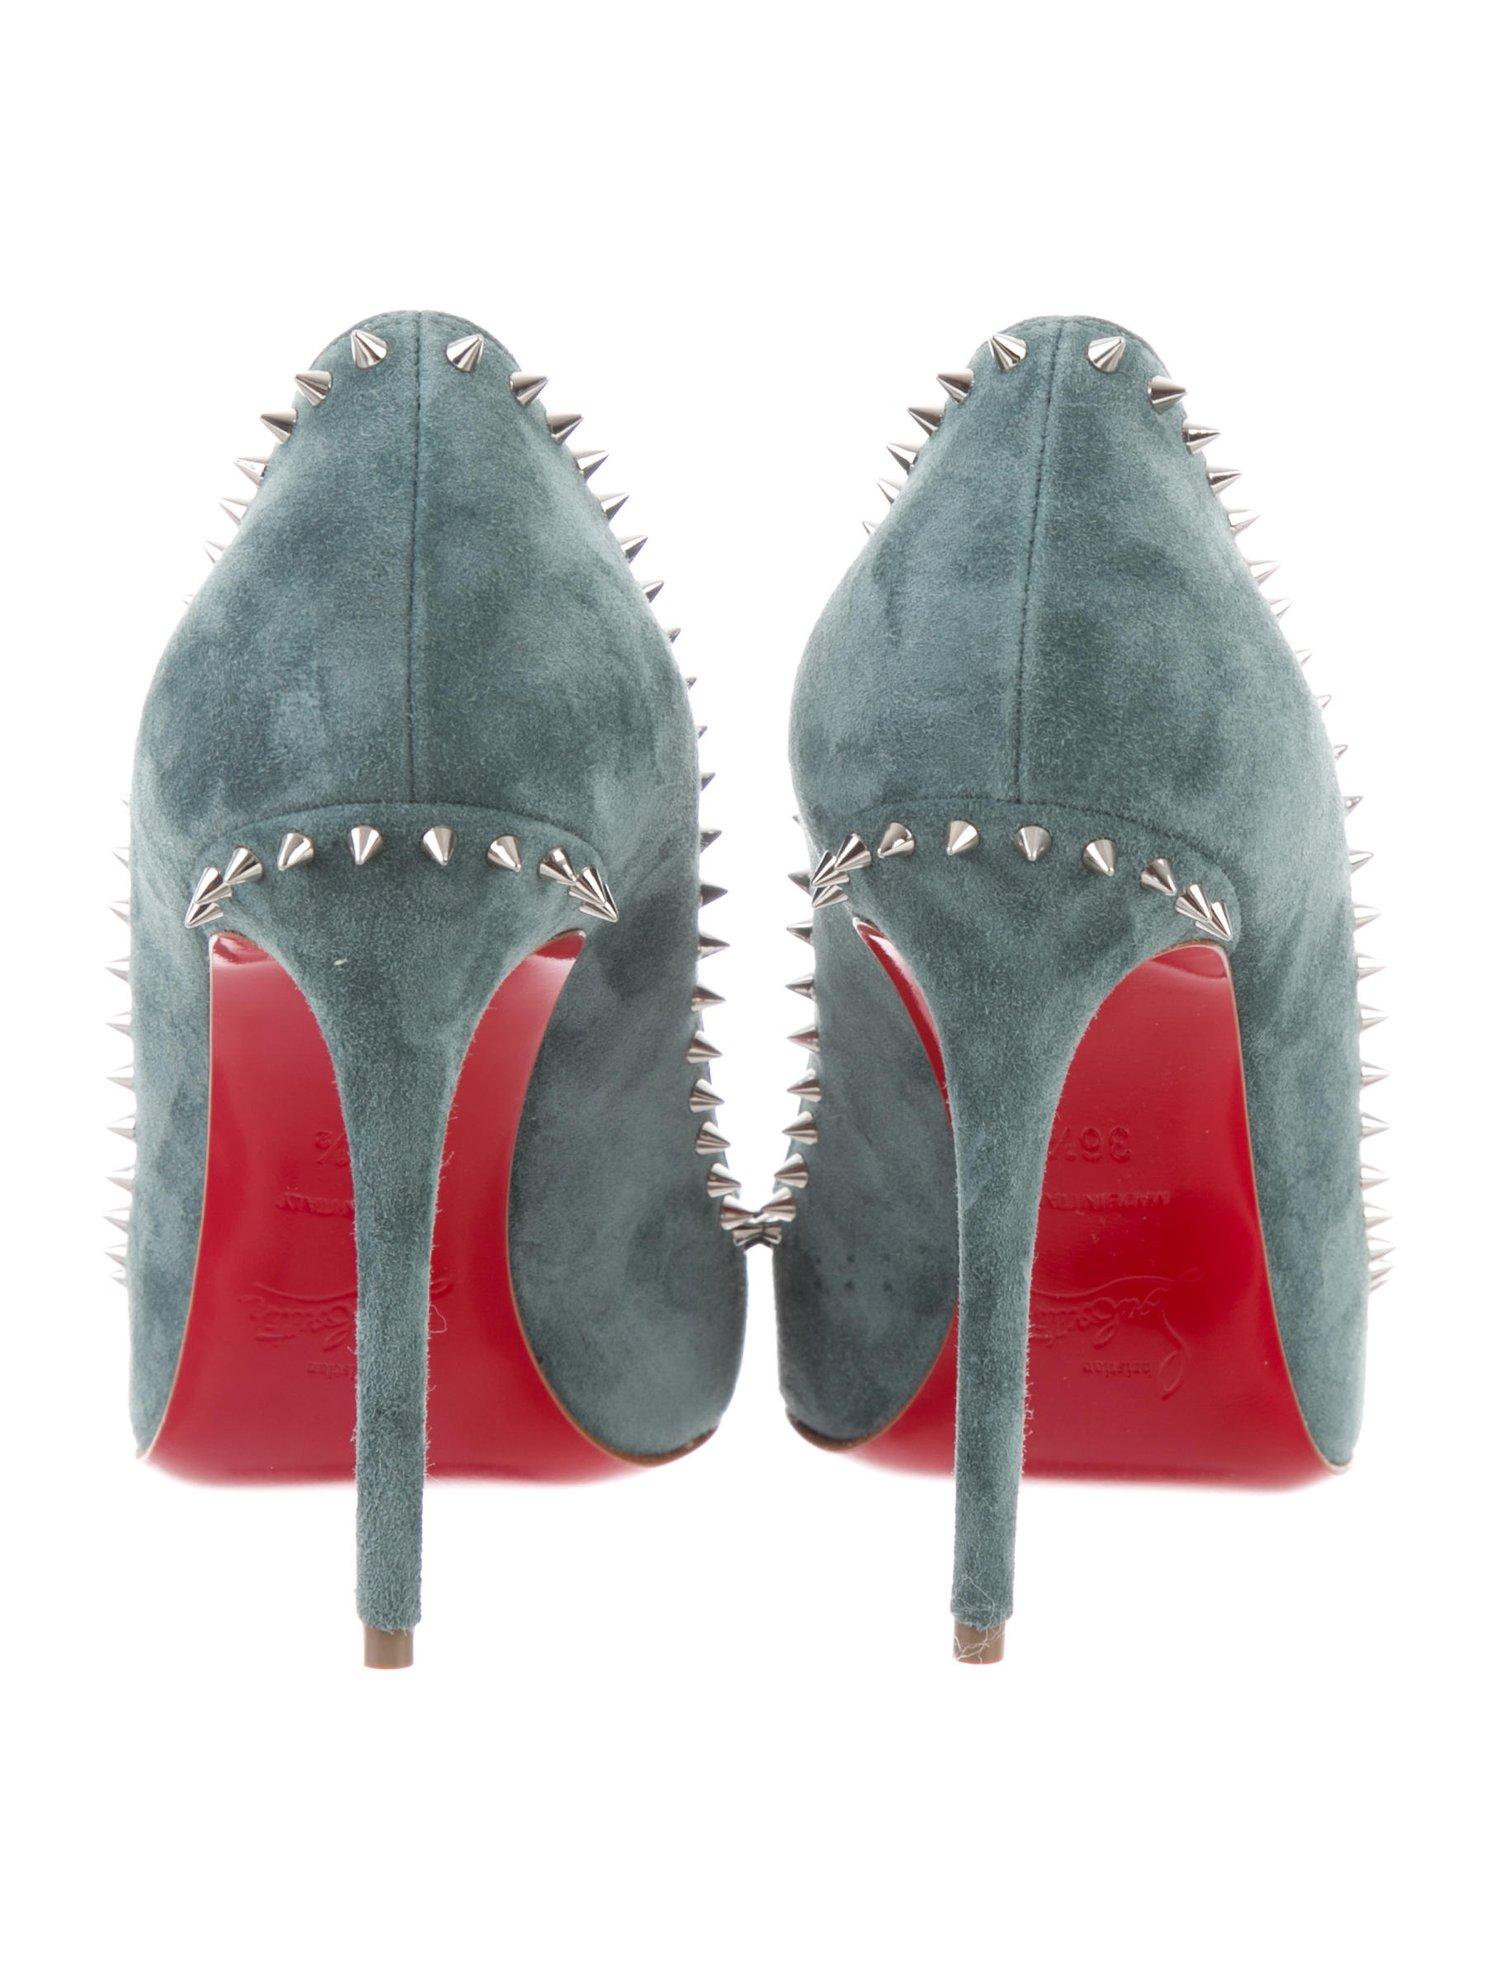 Christian Louboutin NEW Teal Green Suede Silver Stud Evening Pumps Heels  1